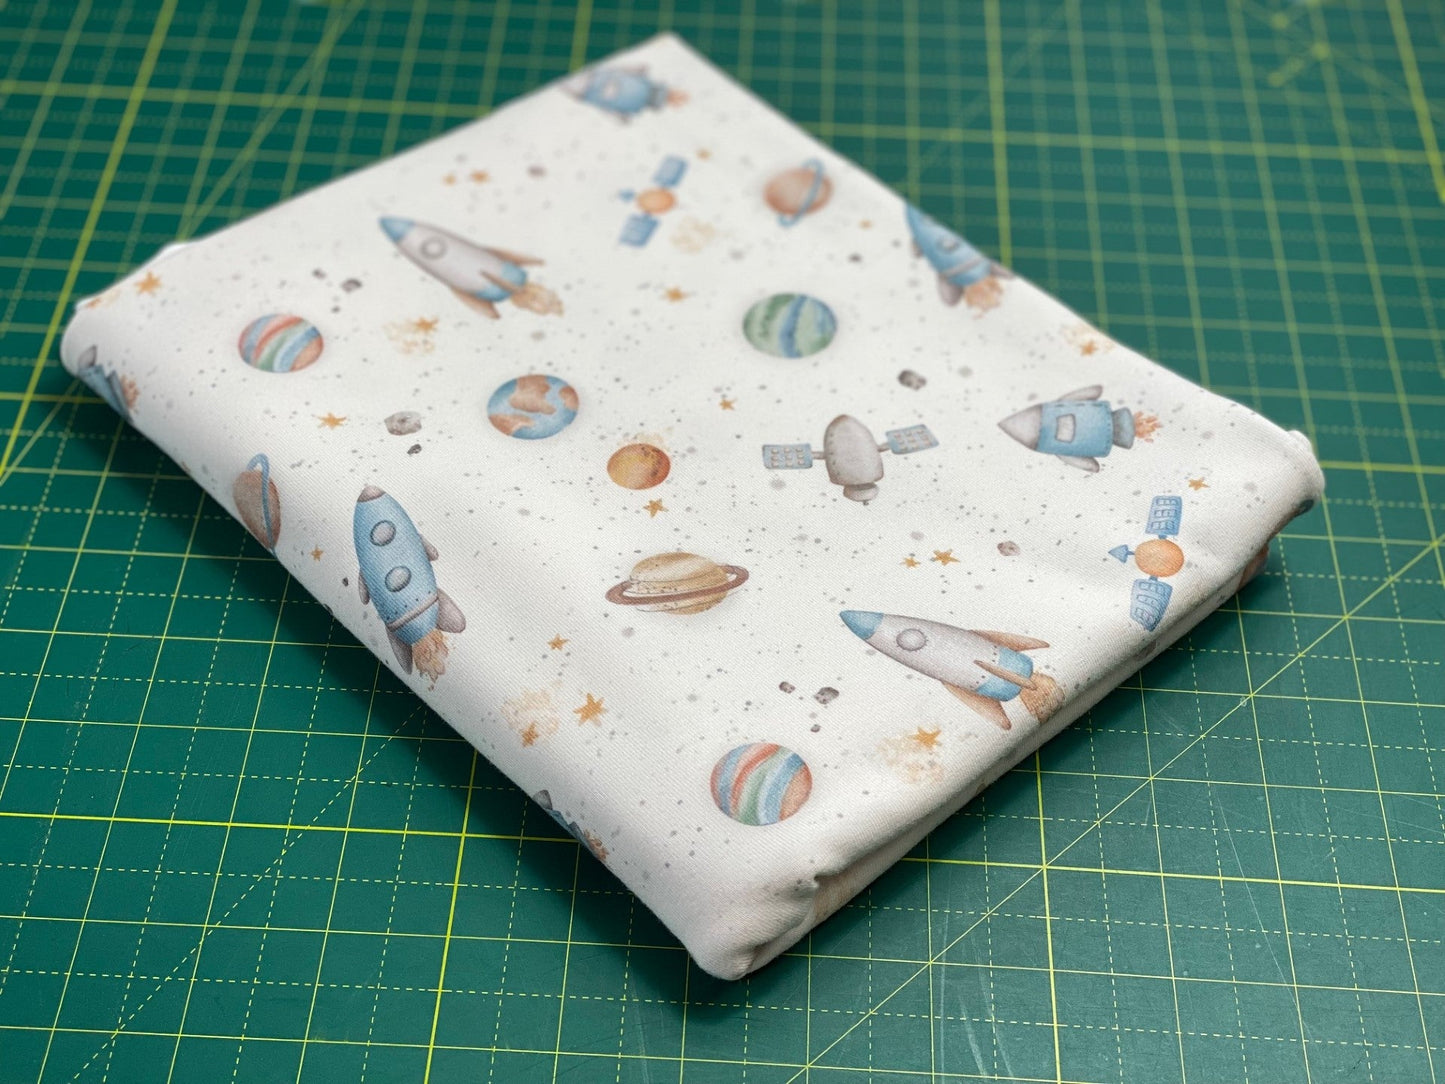 In Stock: Family Fabrics - Autumn River Studio - Spaceships - 220 gsm Jersey - By the 1/2 yd - Little Rhody Sewing Co.